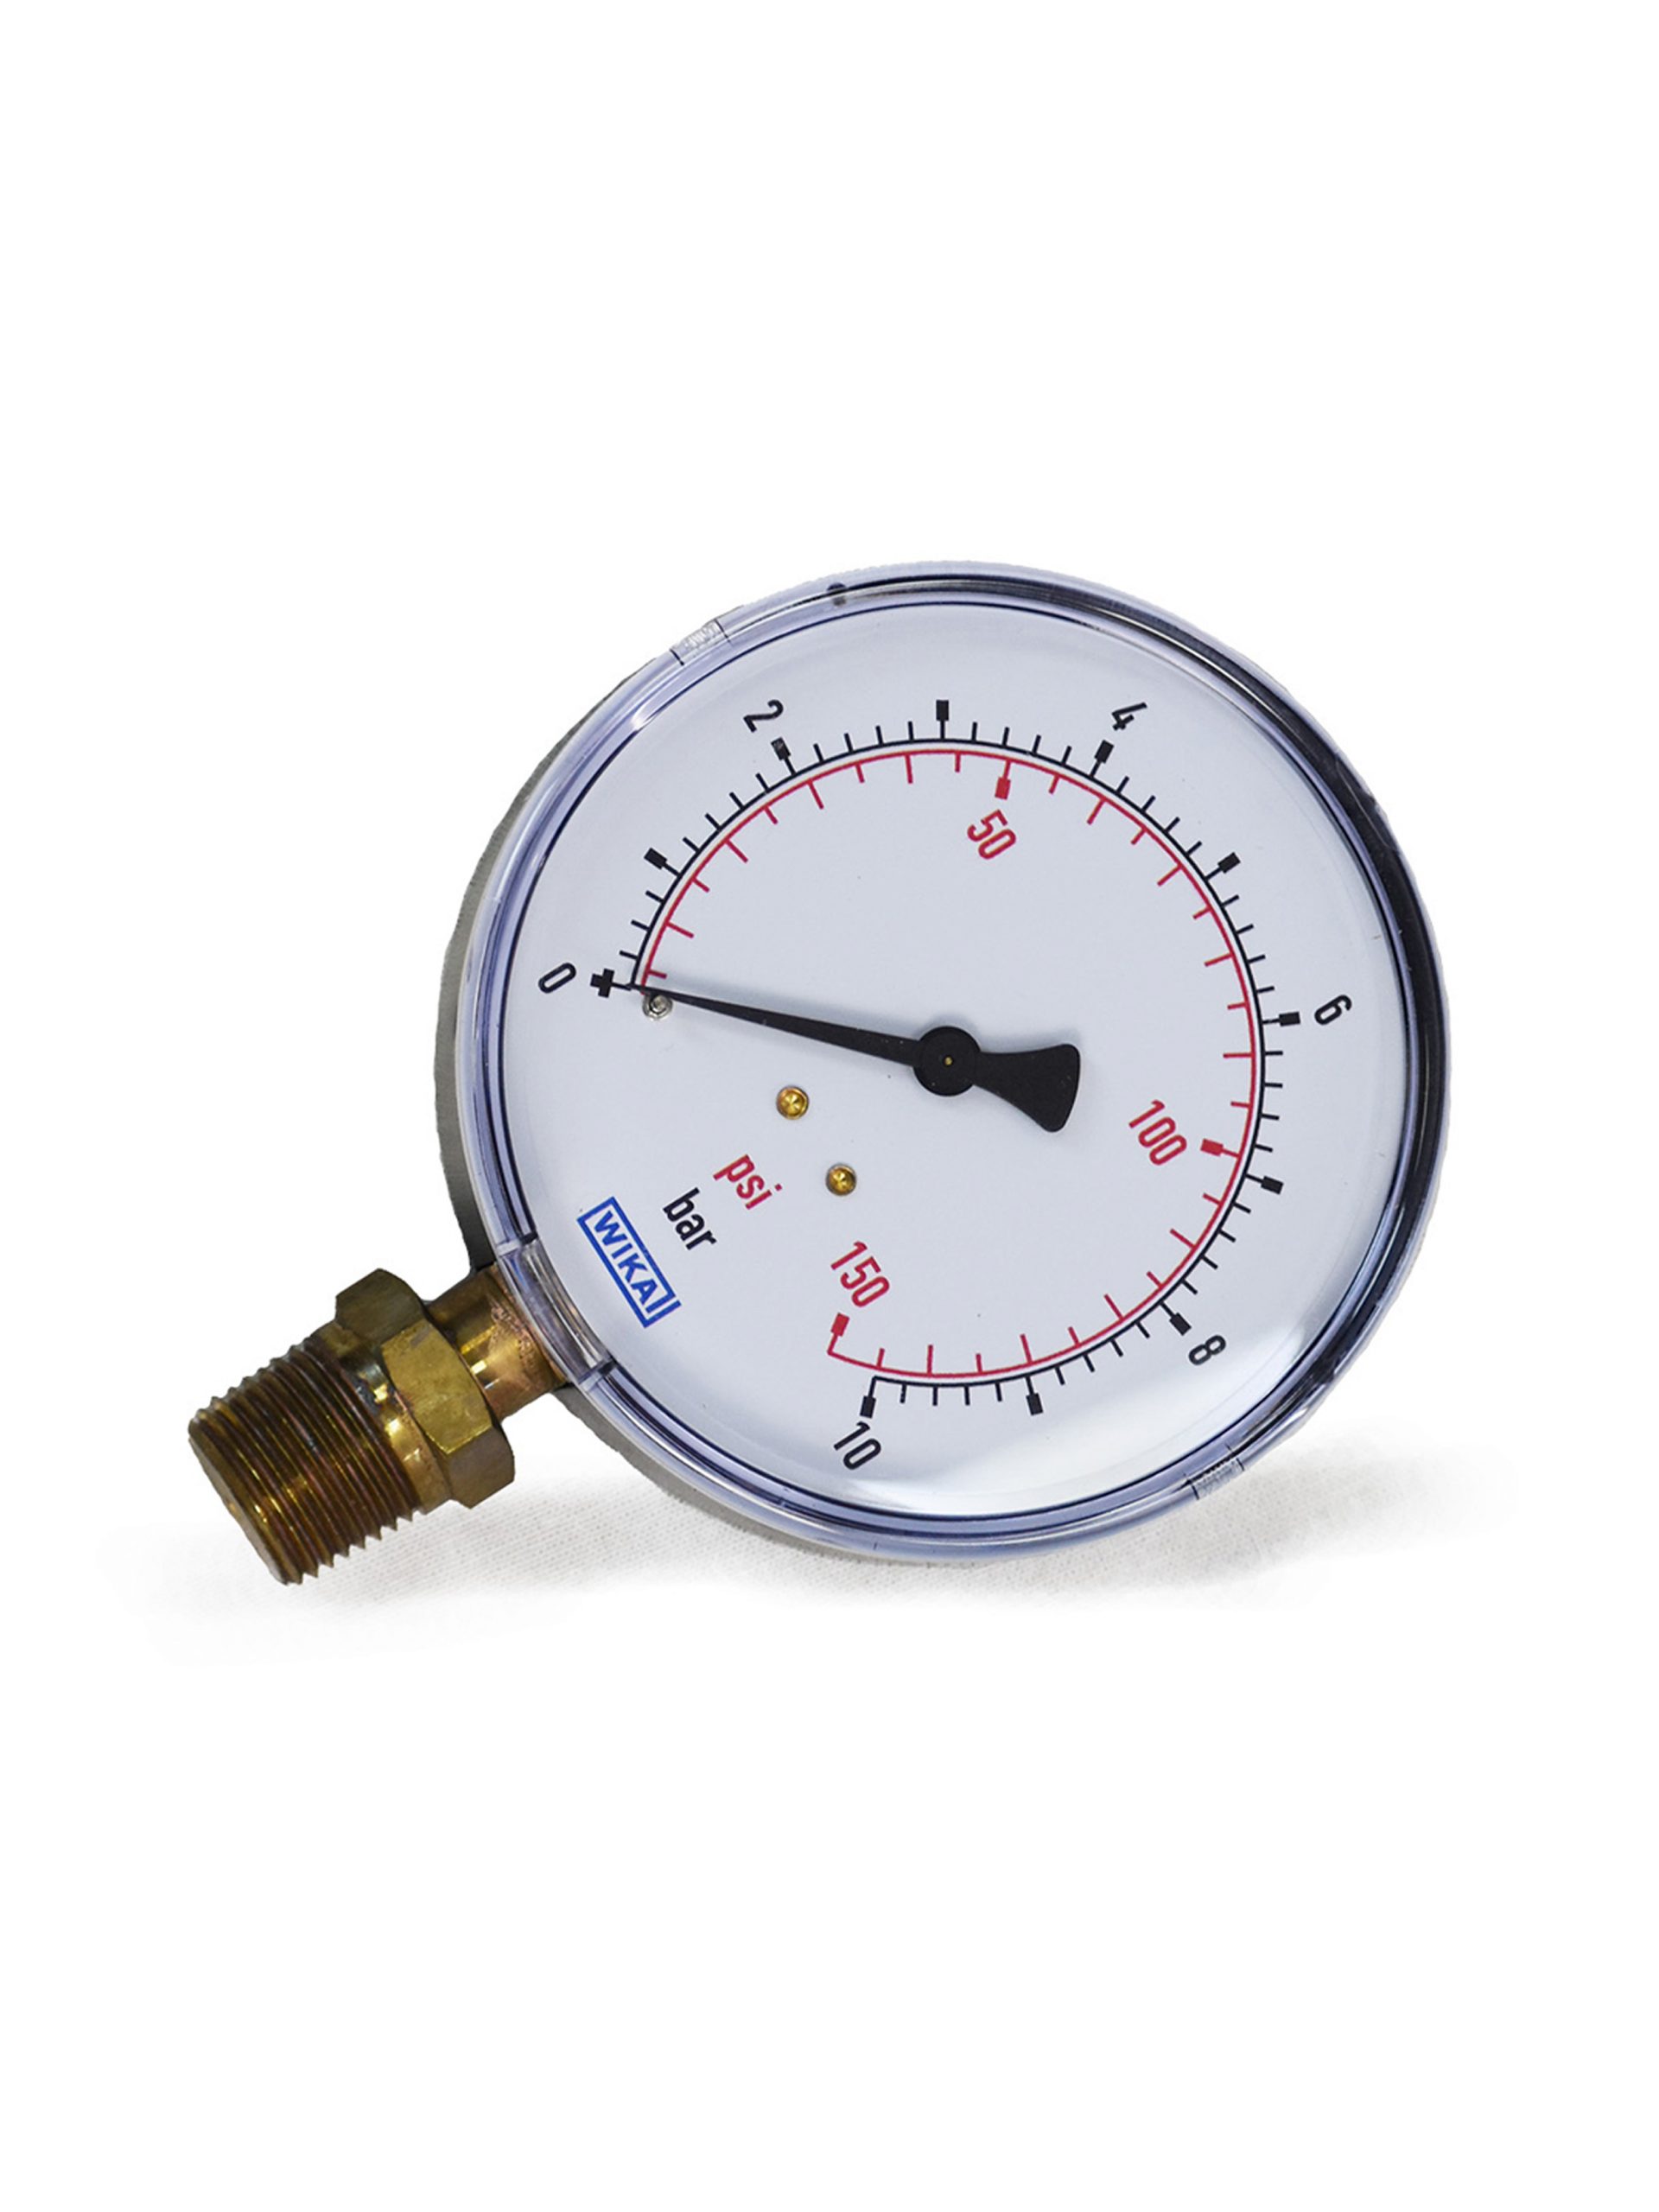 PRESSURE GAUGE 0-10 BAR DIAMETER 4 Inches CONNECTION 1/2 Inches , WIKA from Gas Equipment Company Llc Abu Dhabi, UNITED ARAB EMIRATES